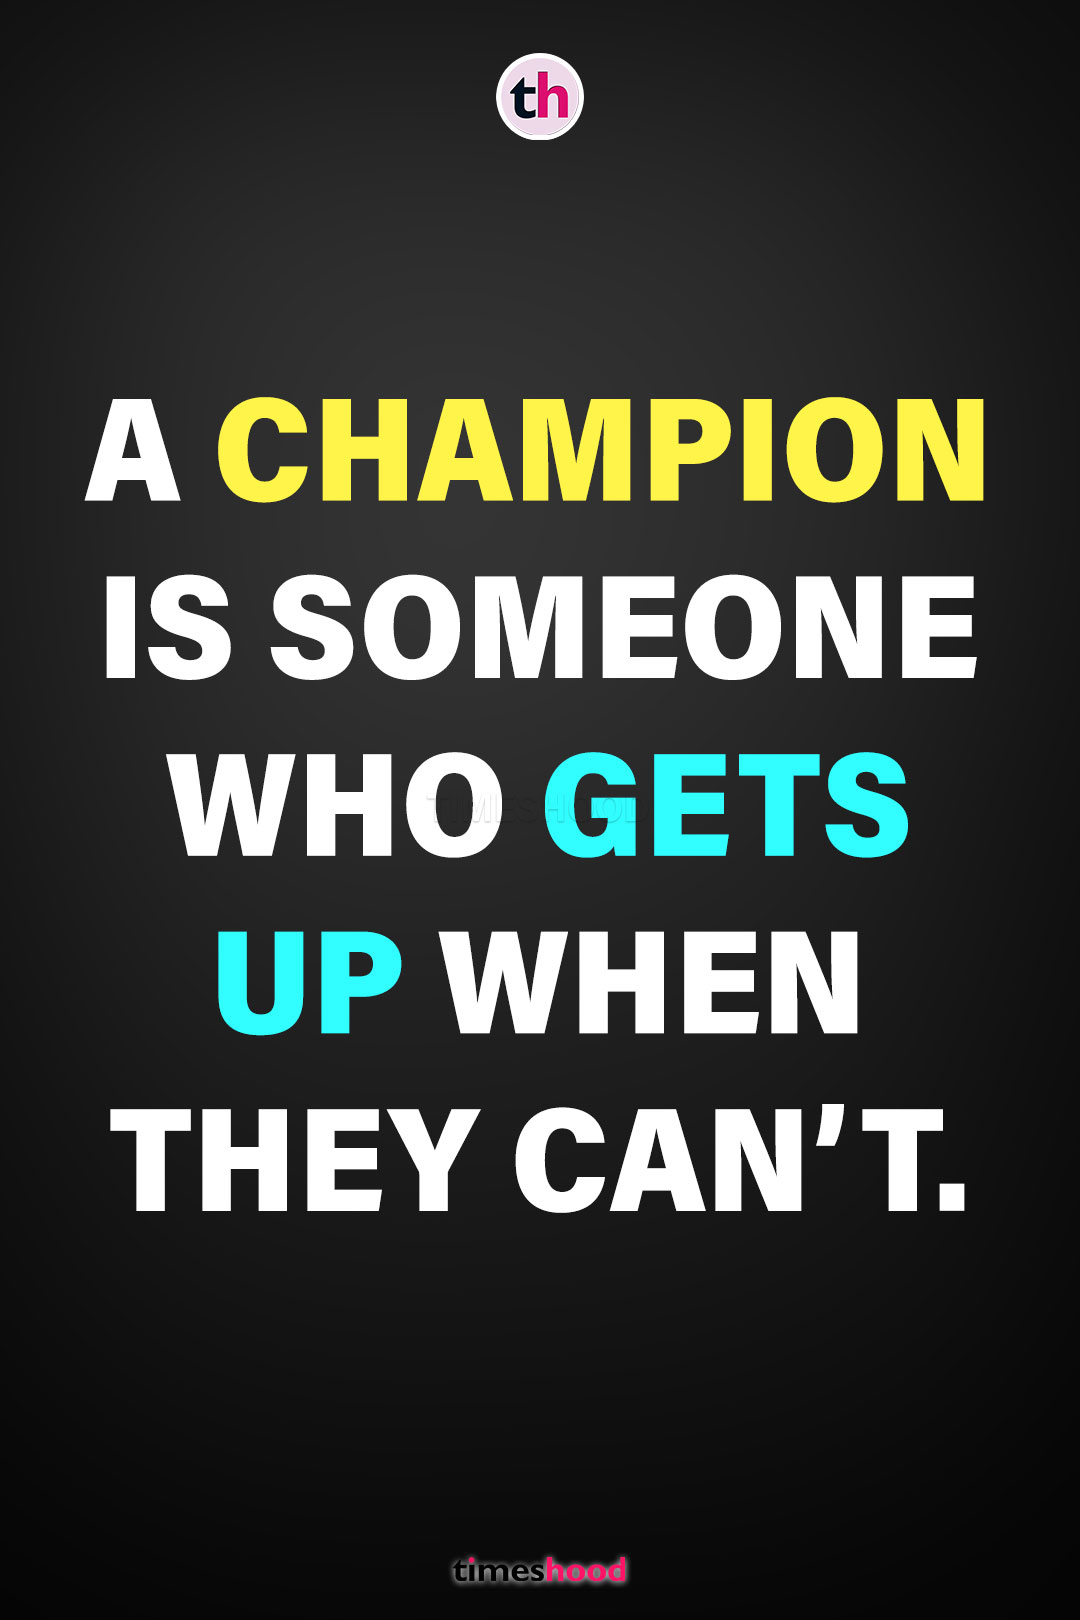 A champion is someone who gets up when they can’t. - Best Fitness Quotes